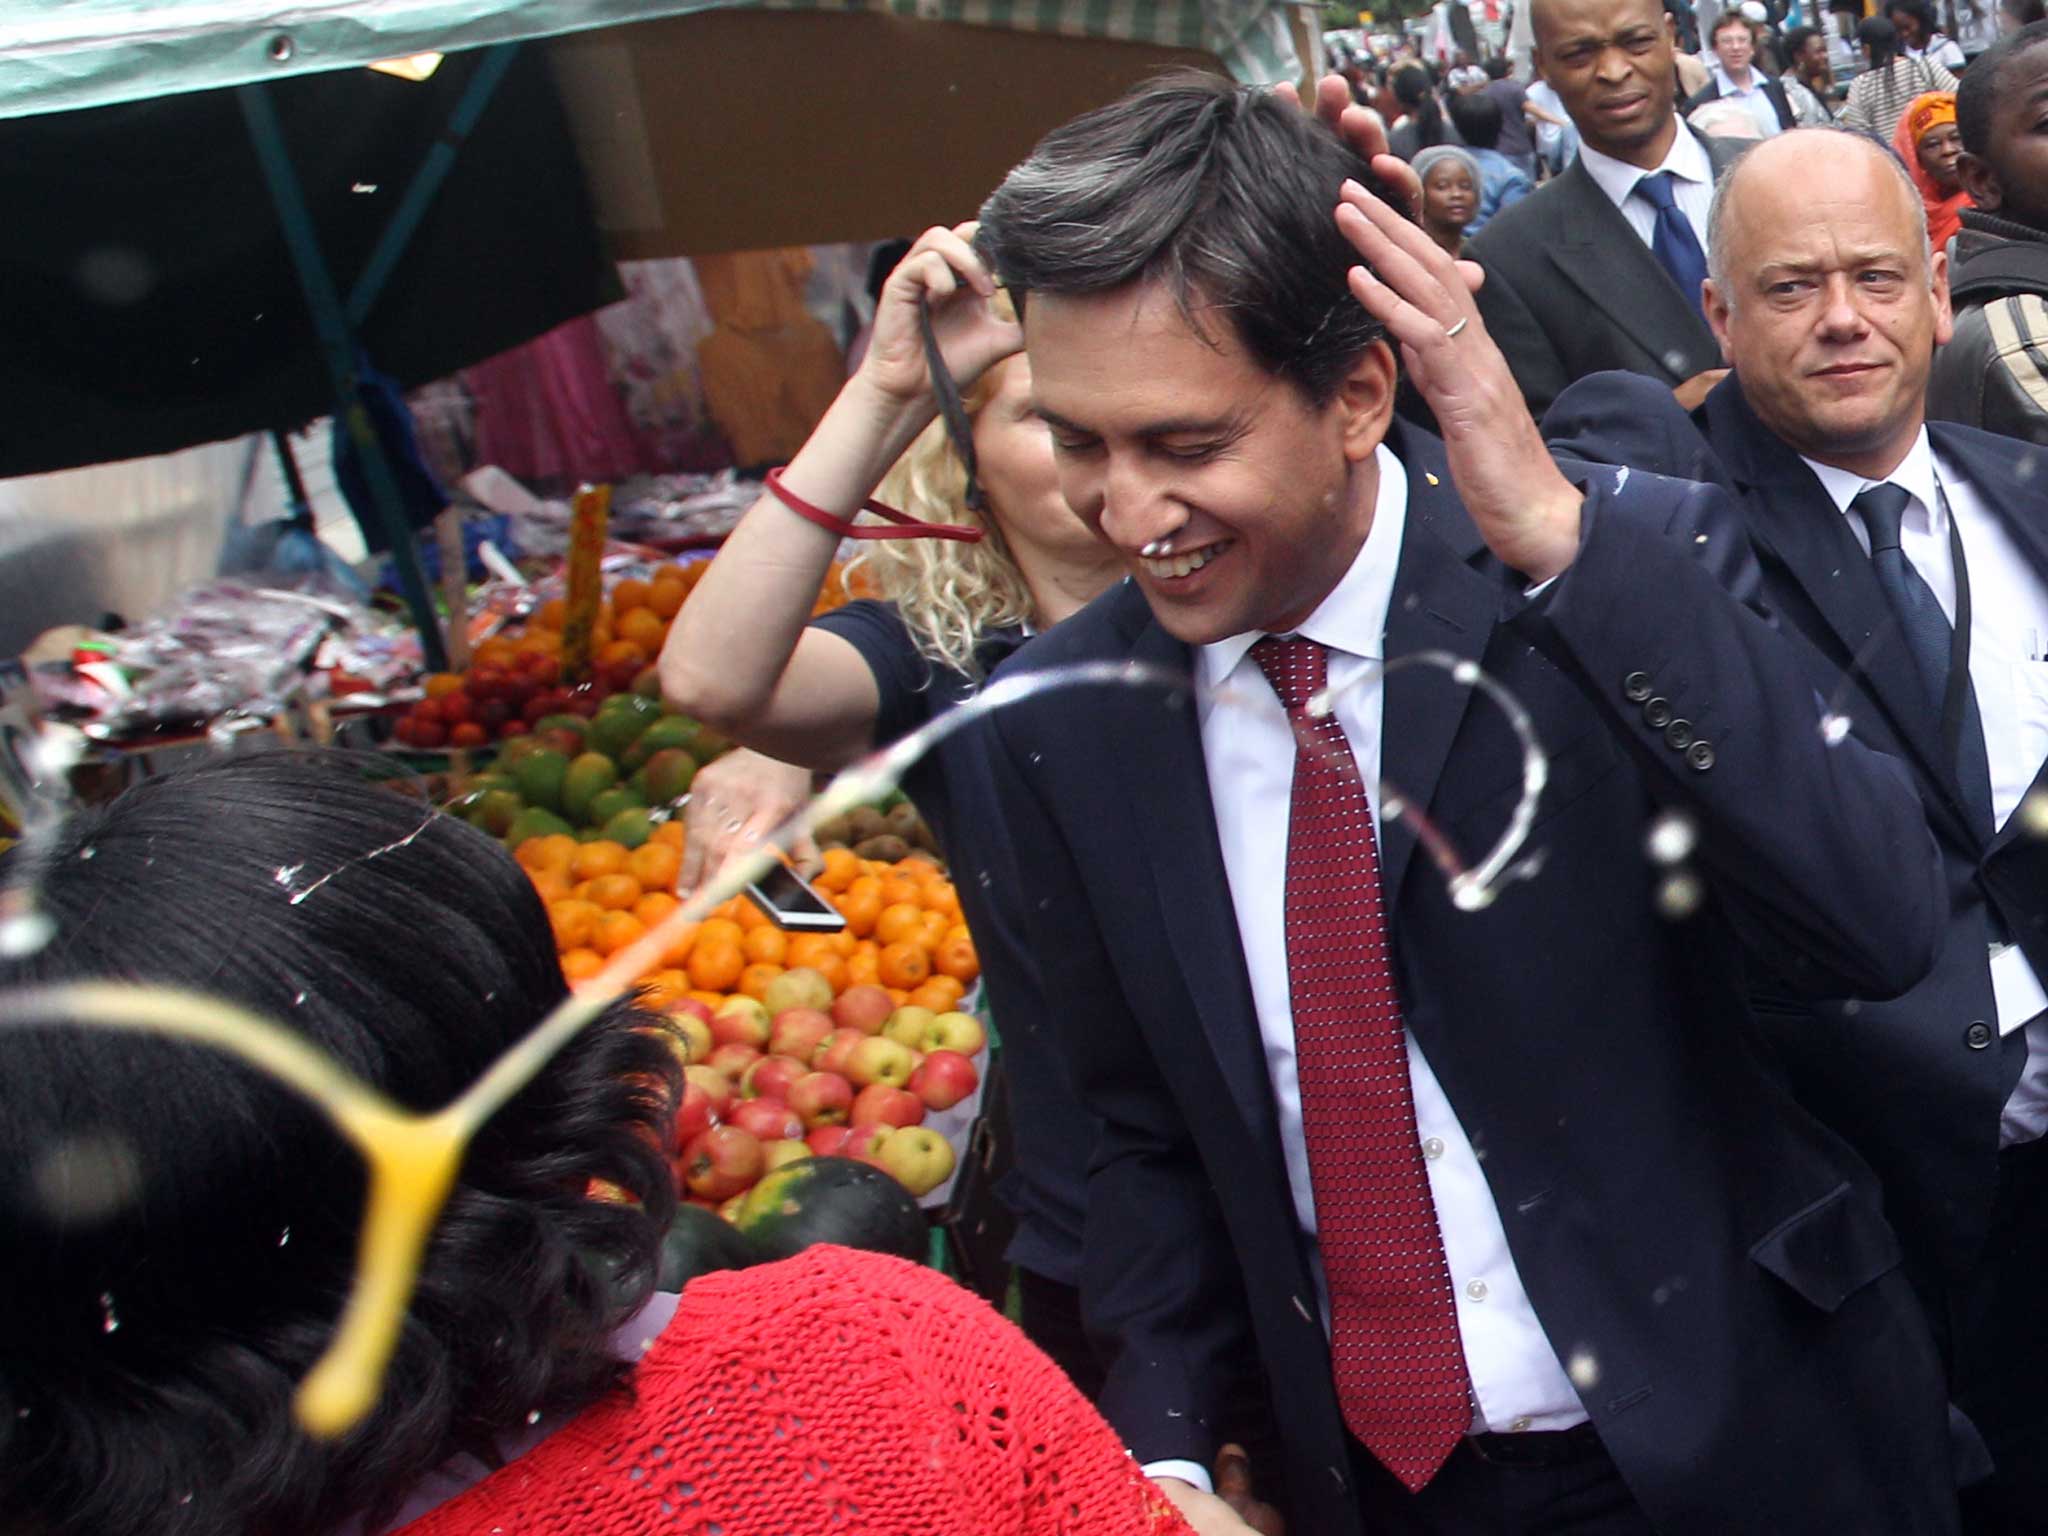 Labour leader Ed Miliband after he was pelted with eggs during a campaign visit in East Street market